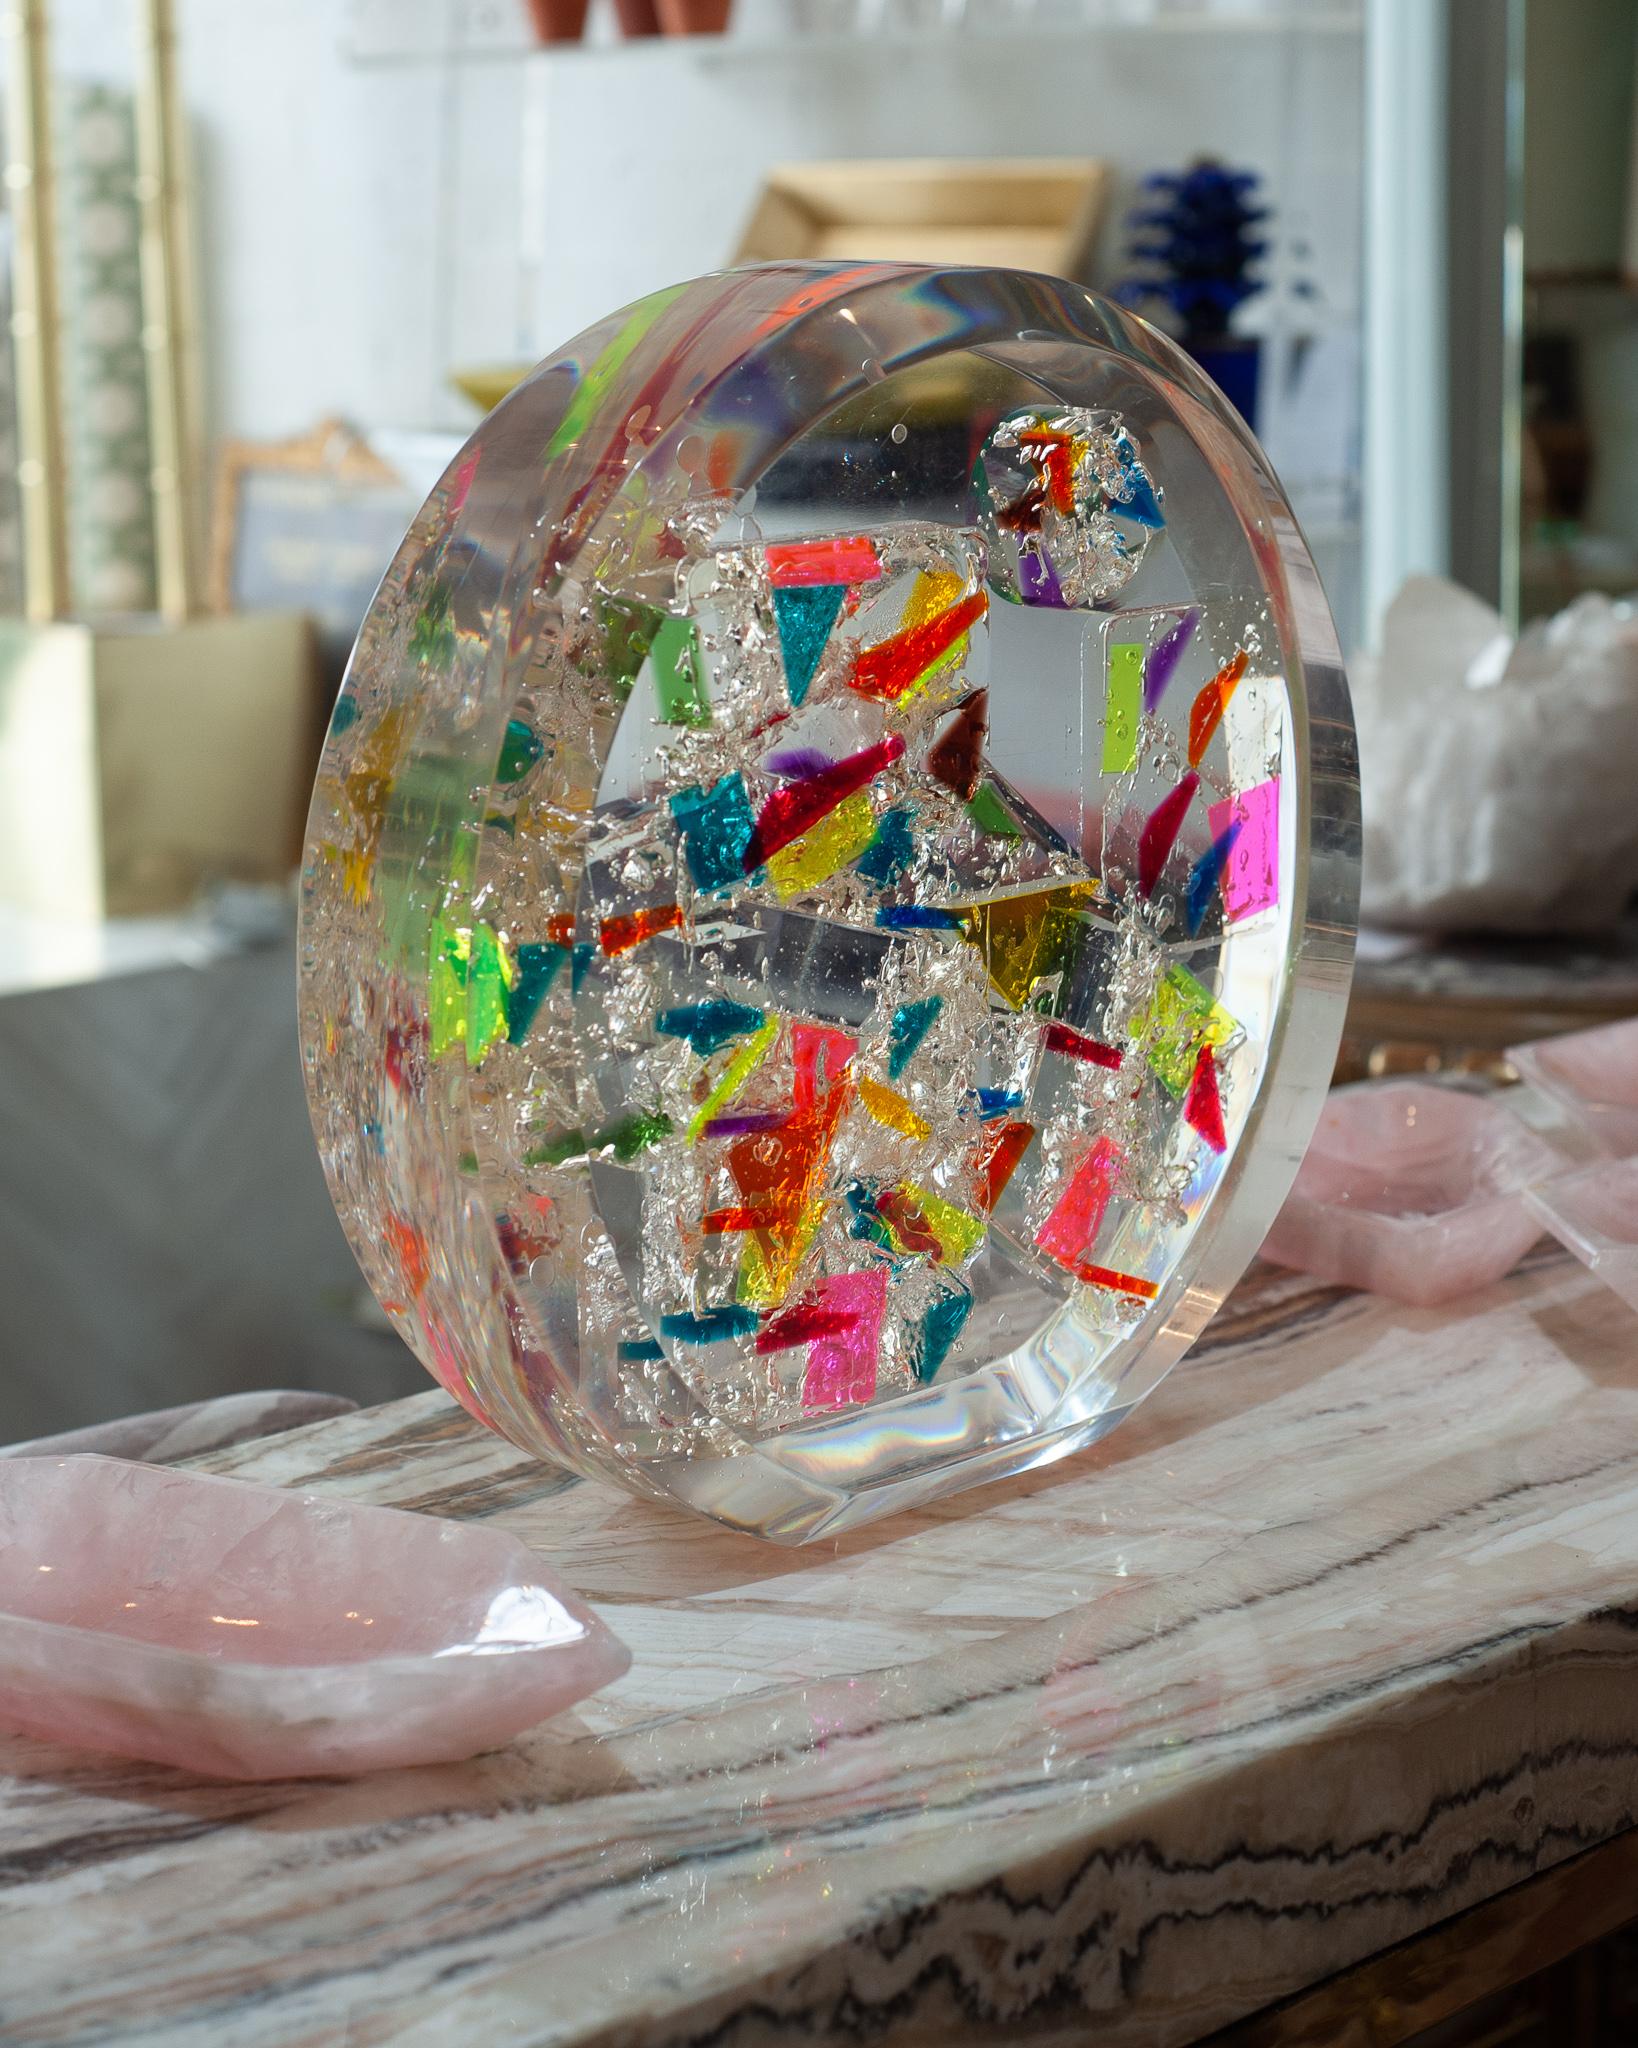 A large acrylic sculpture in multicoloured cast acrylic by a Cuban artist. Cast entirely in clear acrylic with splashes of pinks, blue, oranges, yellows and greens, this vibrant sculpture catches the light beautifully. It is a modern and unusual